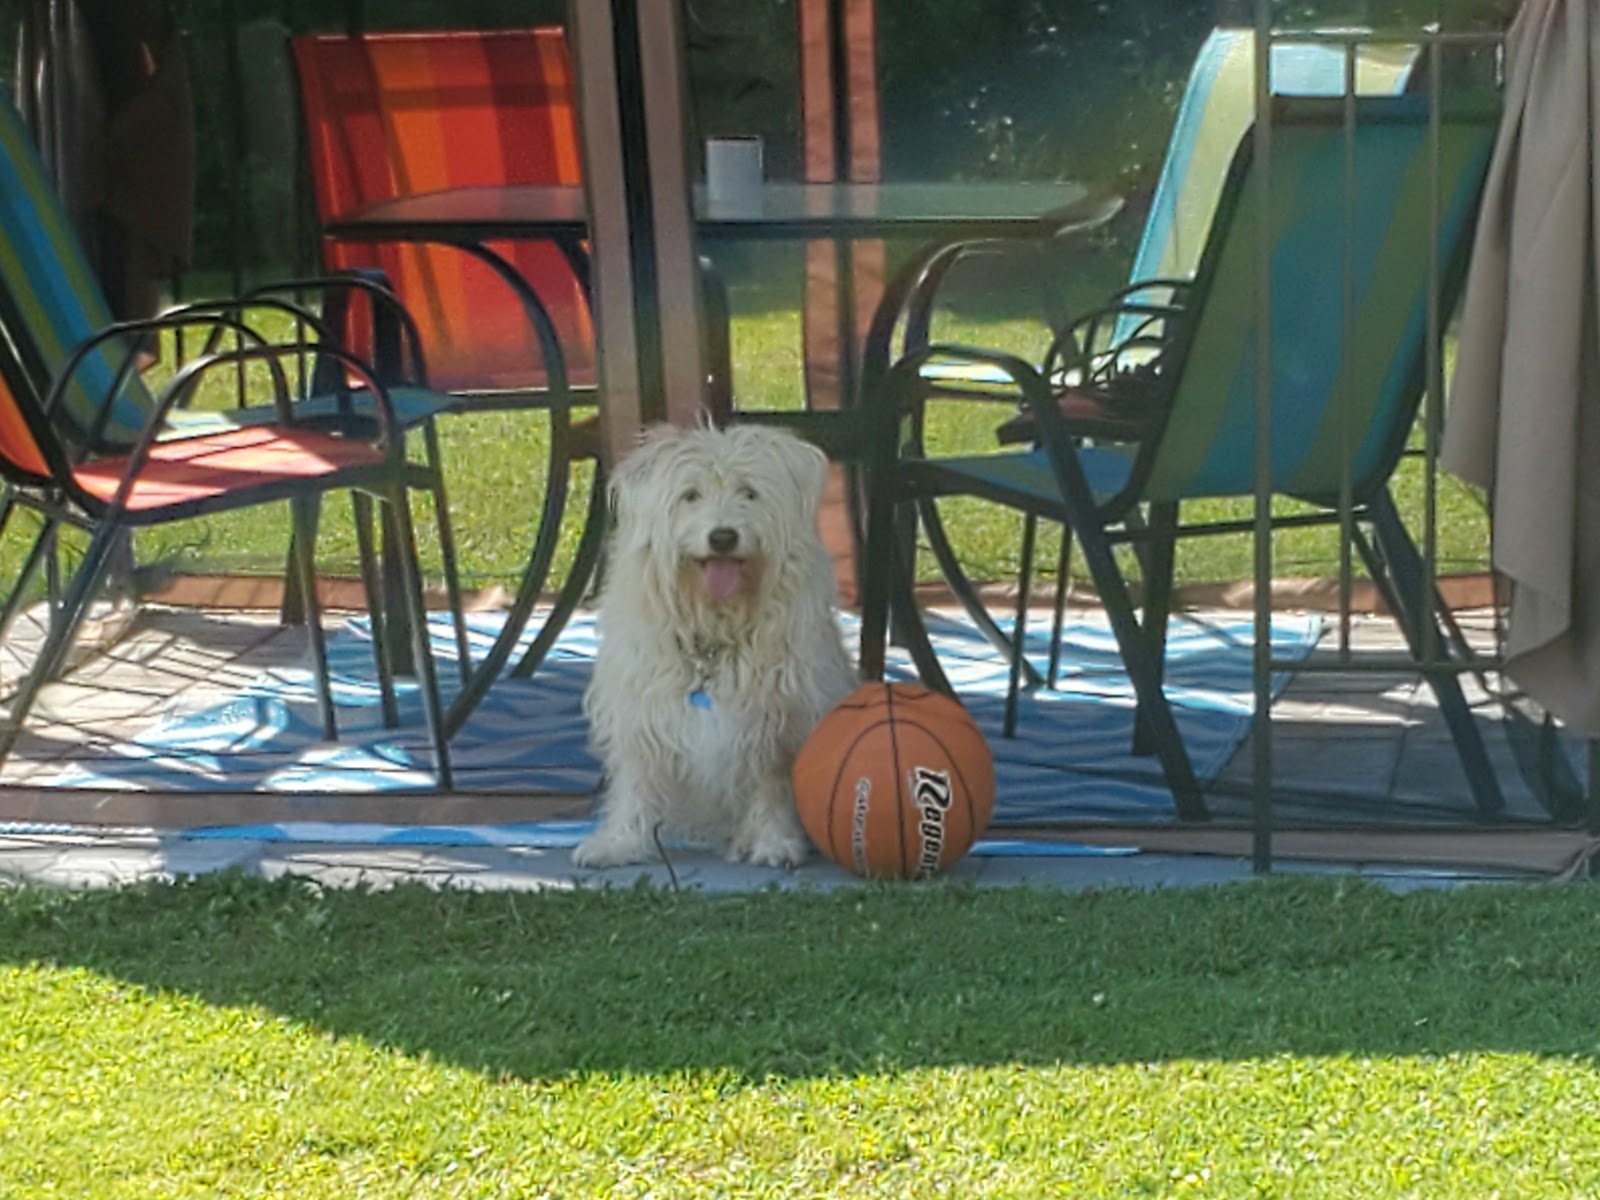 Cooper just wants to play ball, while Rosey stays in the shade!